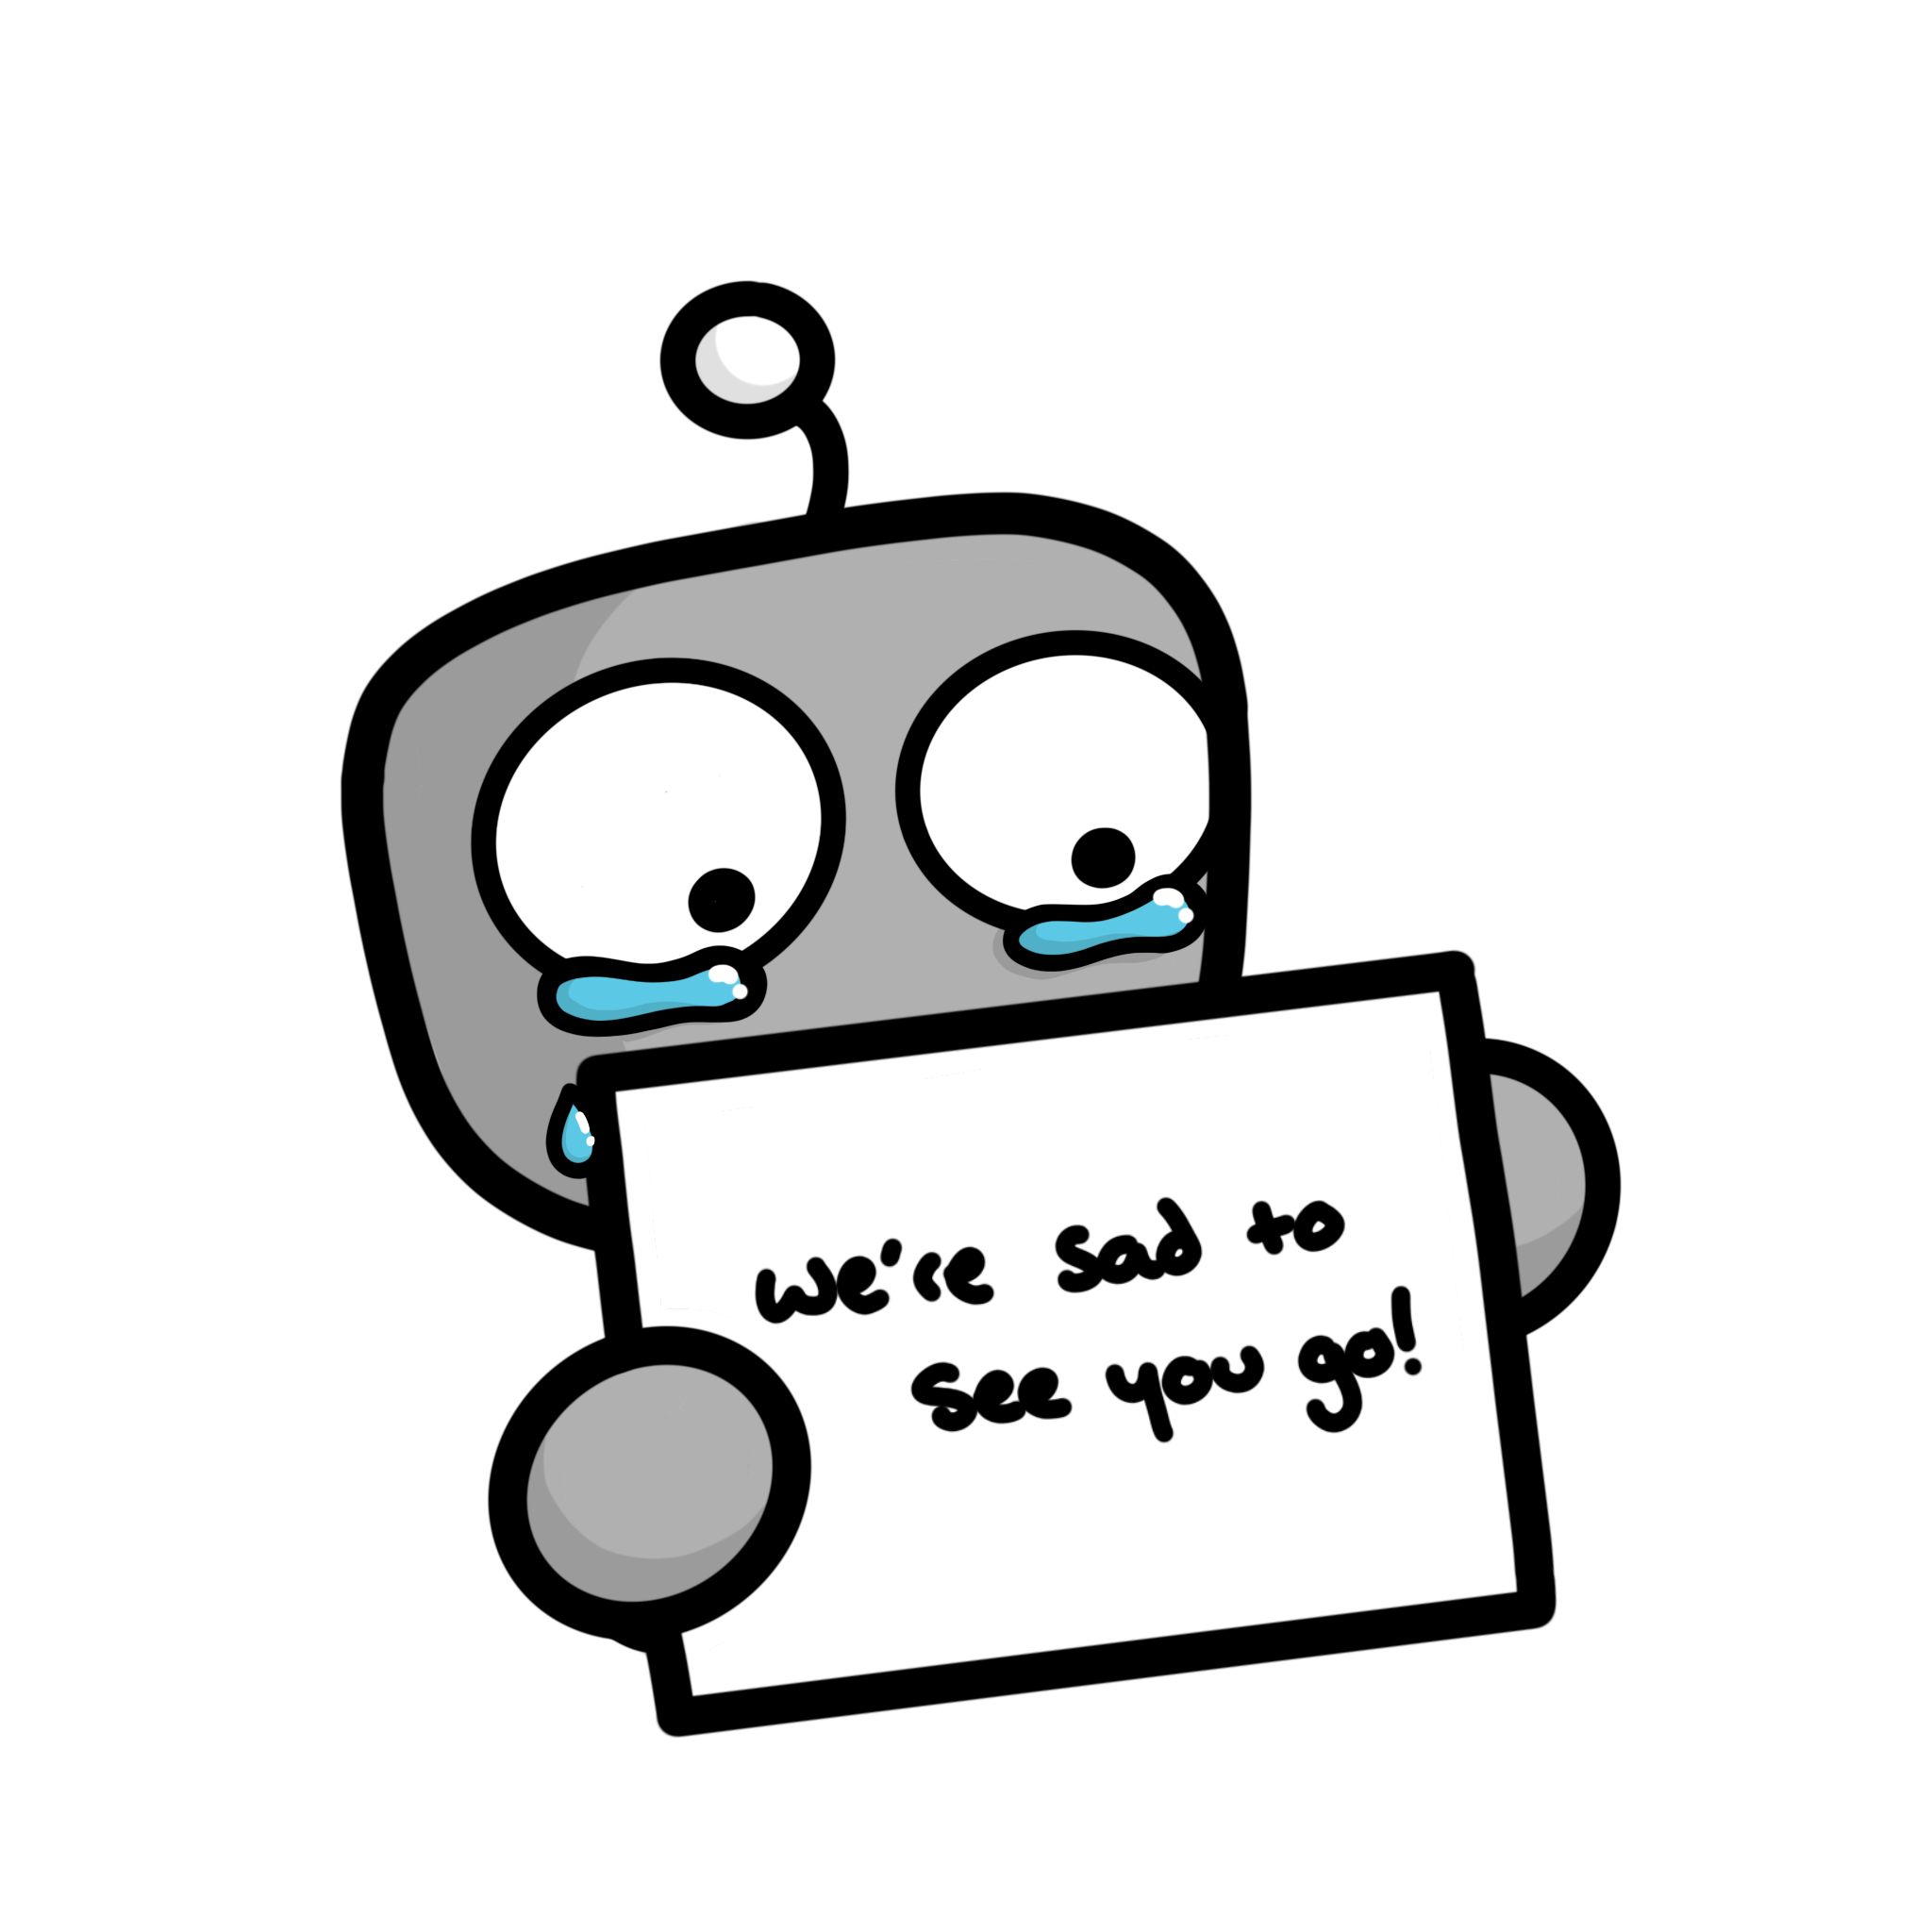 Sad crying robot holding a sign that says 'sorry to see you go'